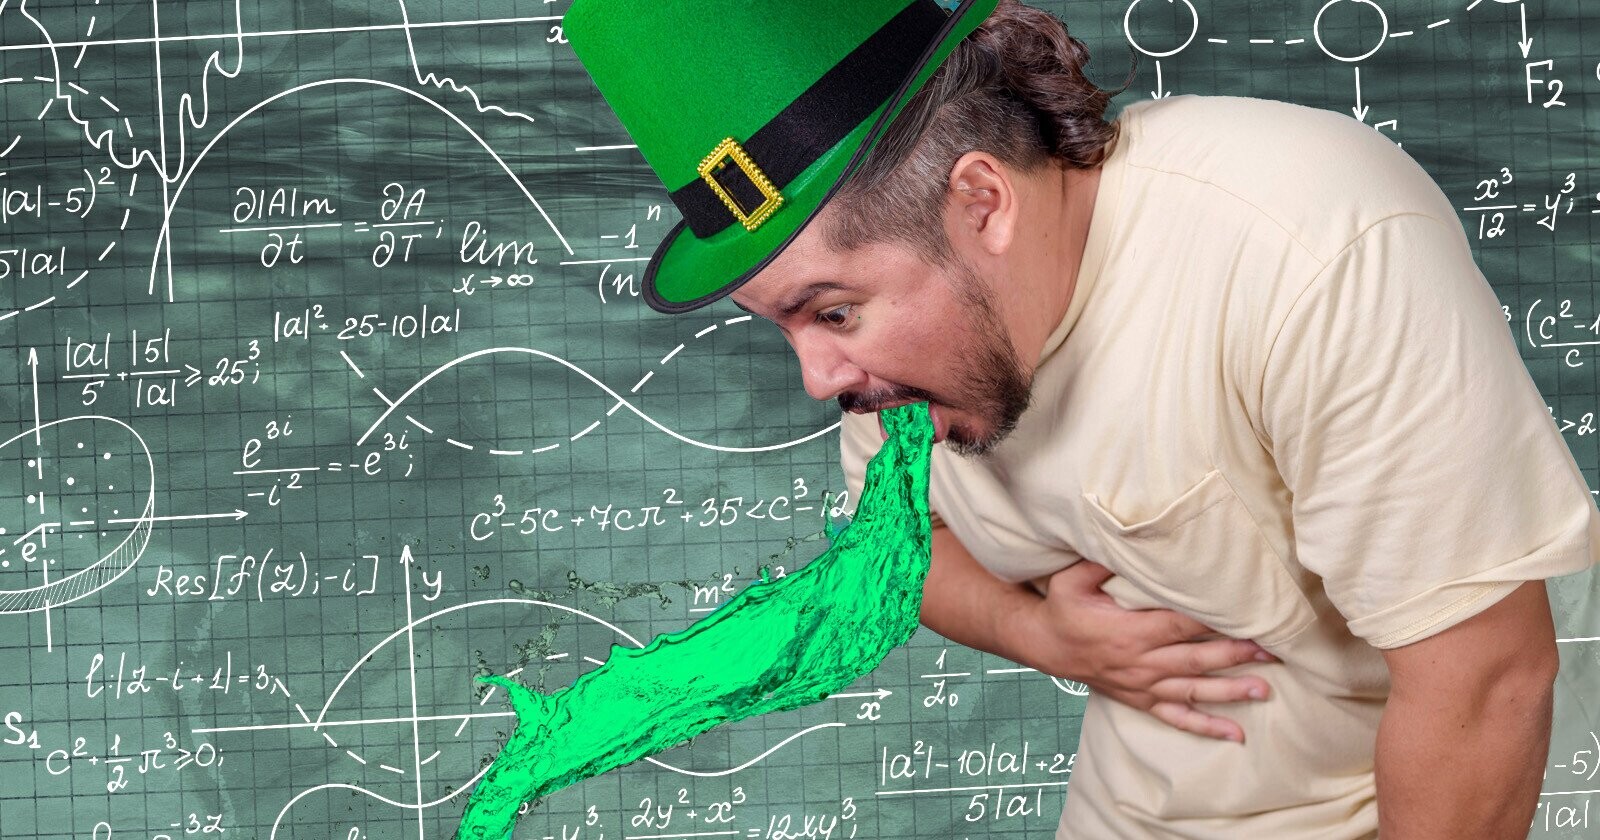 An Incredibly Exact Calculation of Precisely How Many People Throw Up on St. Patrick’s Day